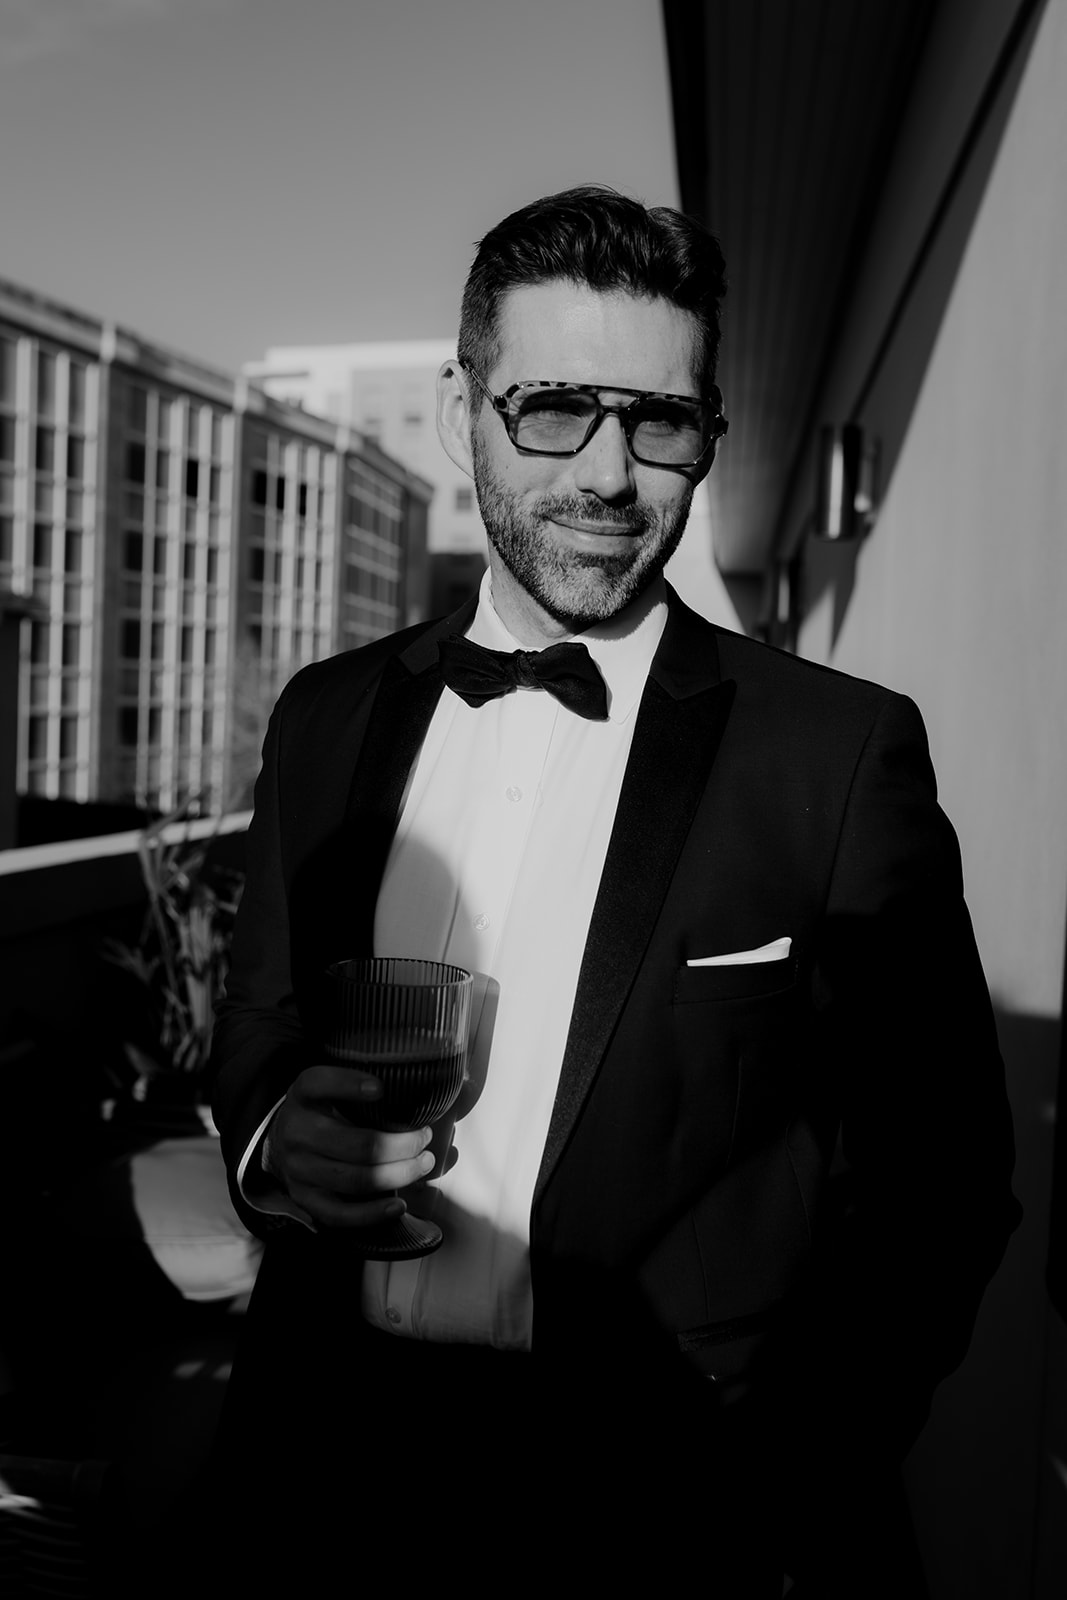 Black and white photo of groom with sunglasses standing on balcony